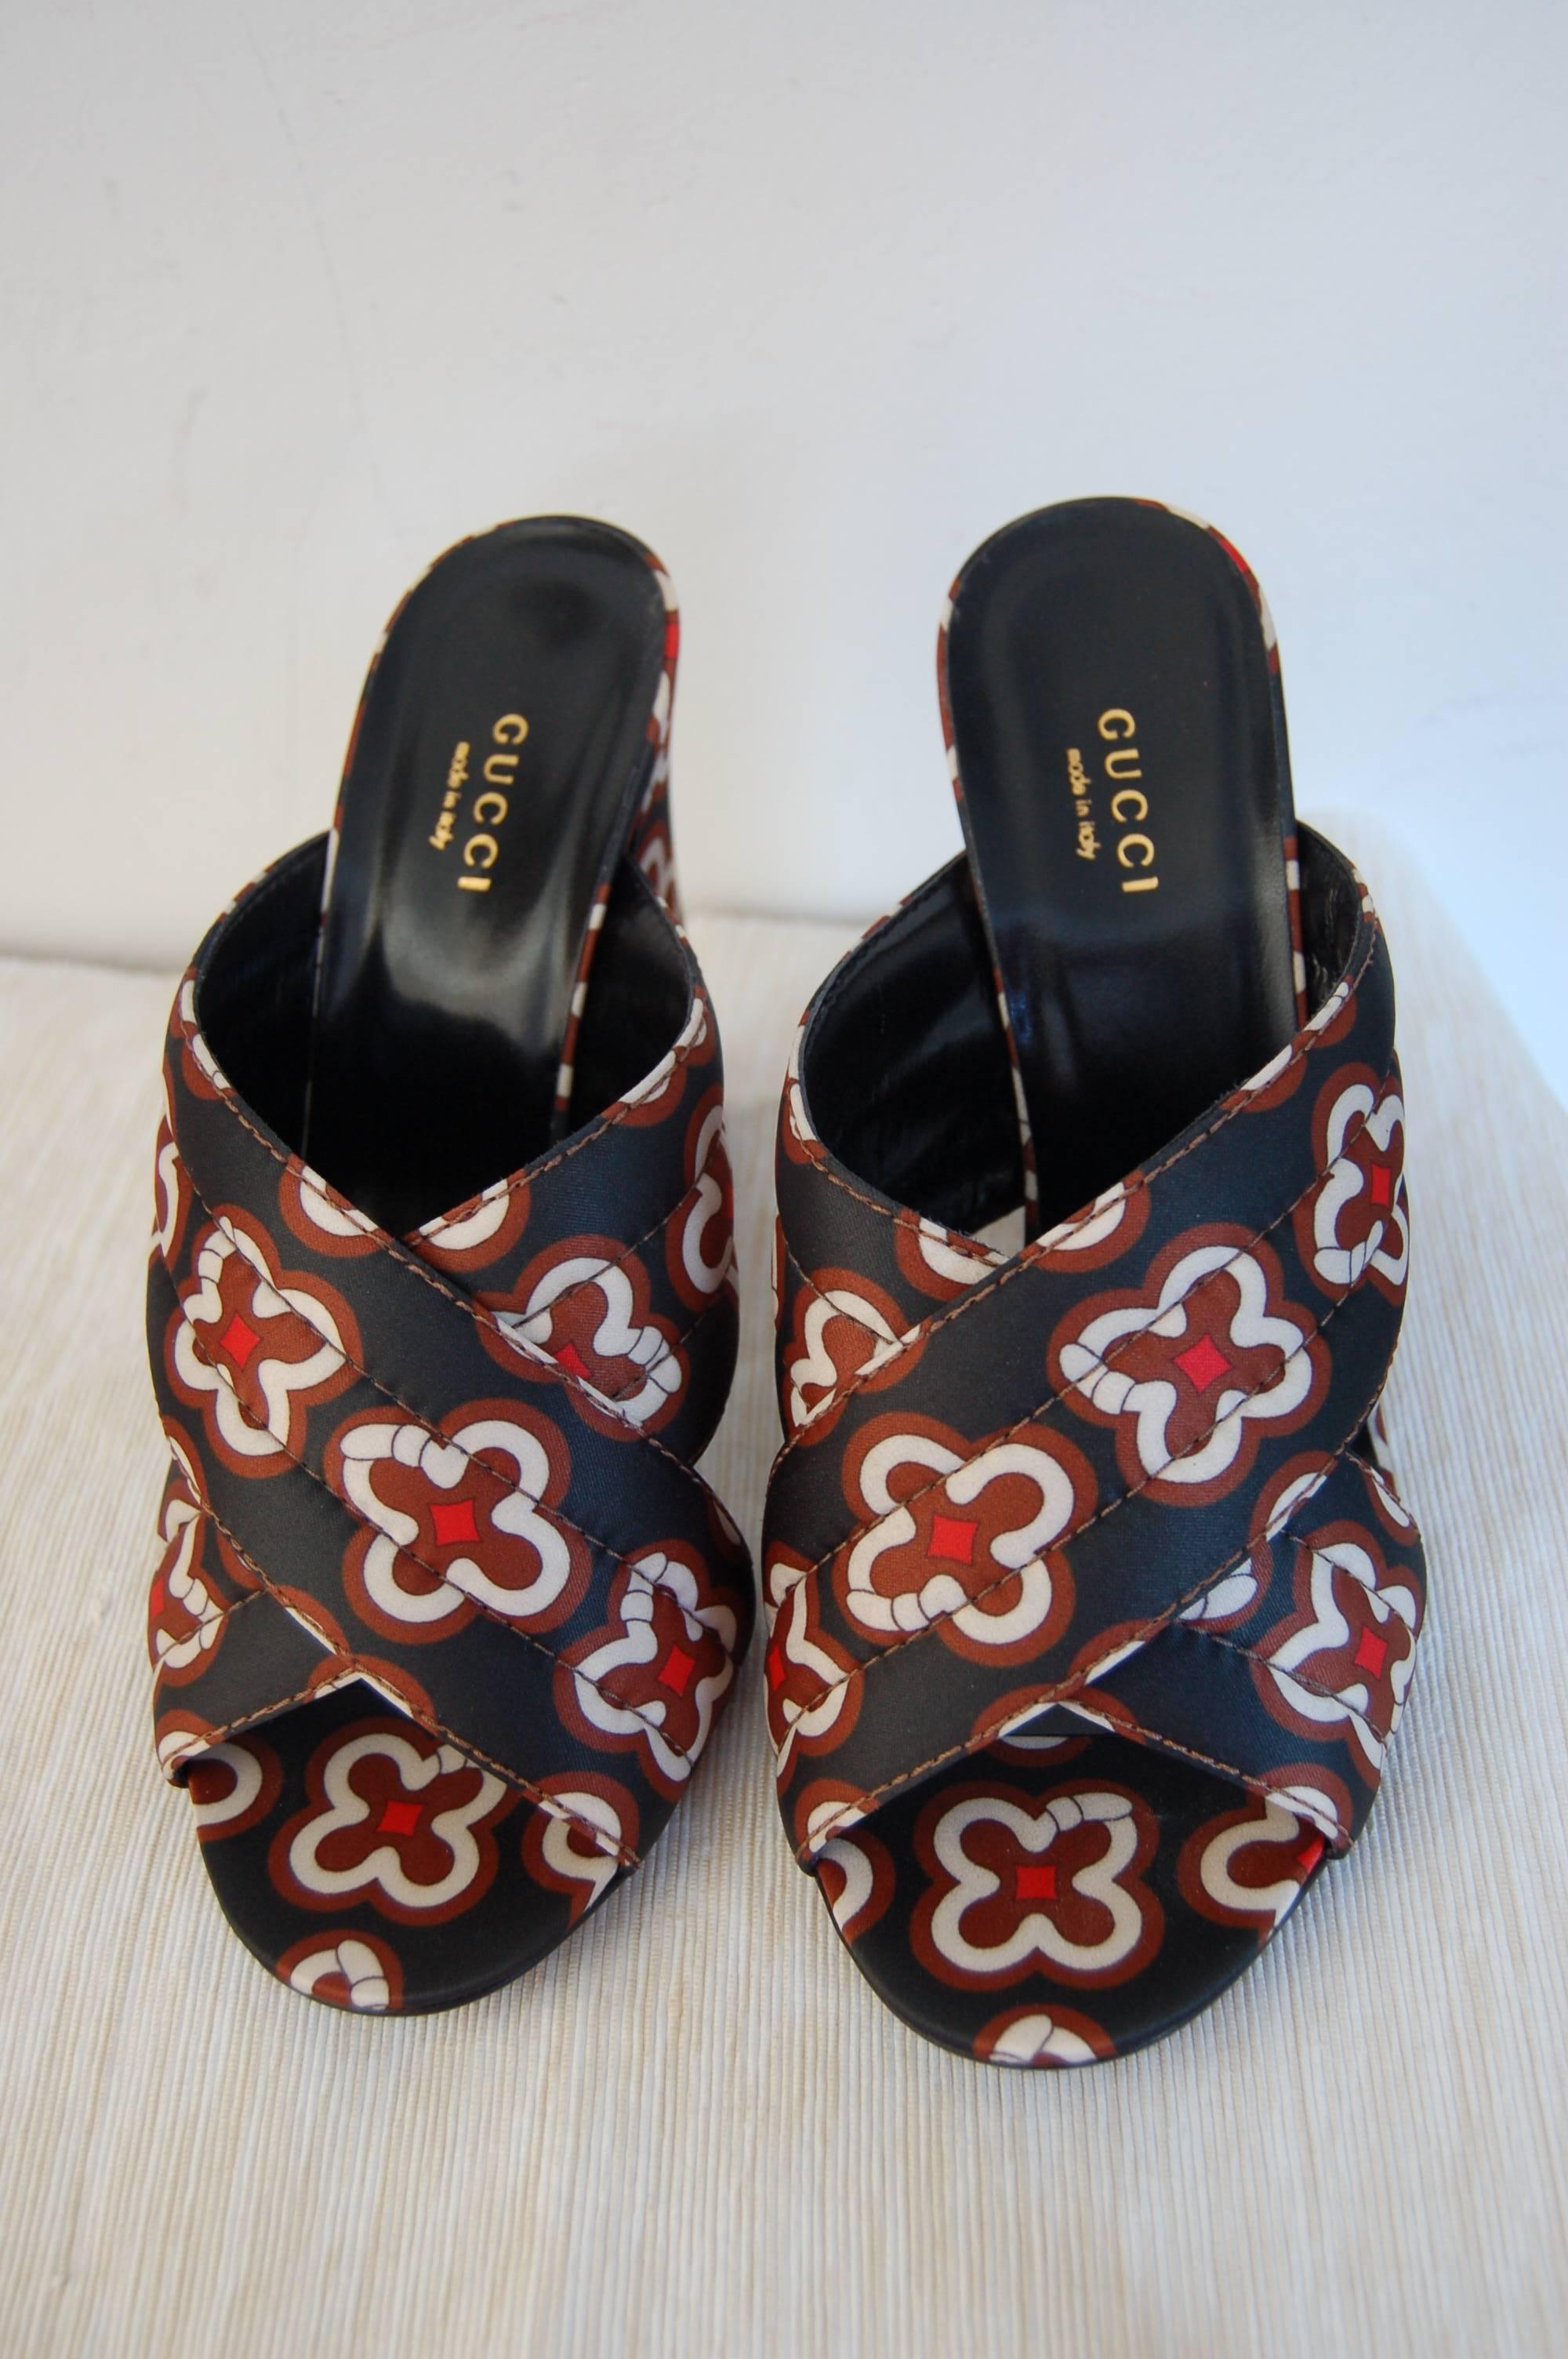 Gucci Sandals Mules
Petrol- colored satin new
size 39.5 (Italy)
high heel 12 cm.
Packing: dustbag, shoe box